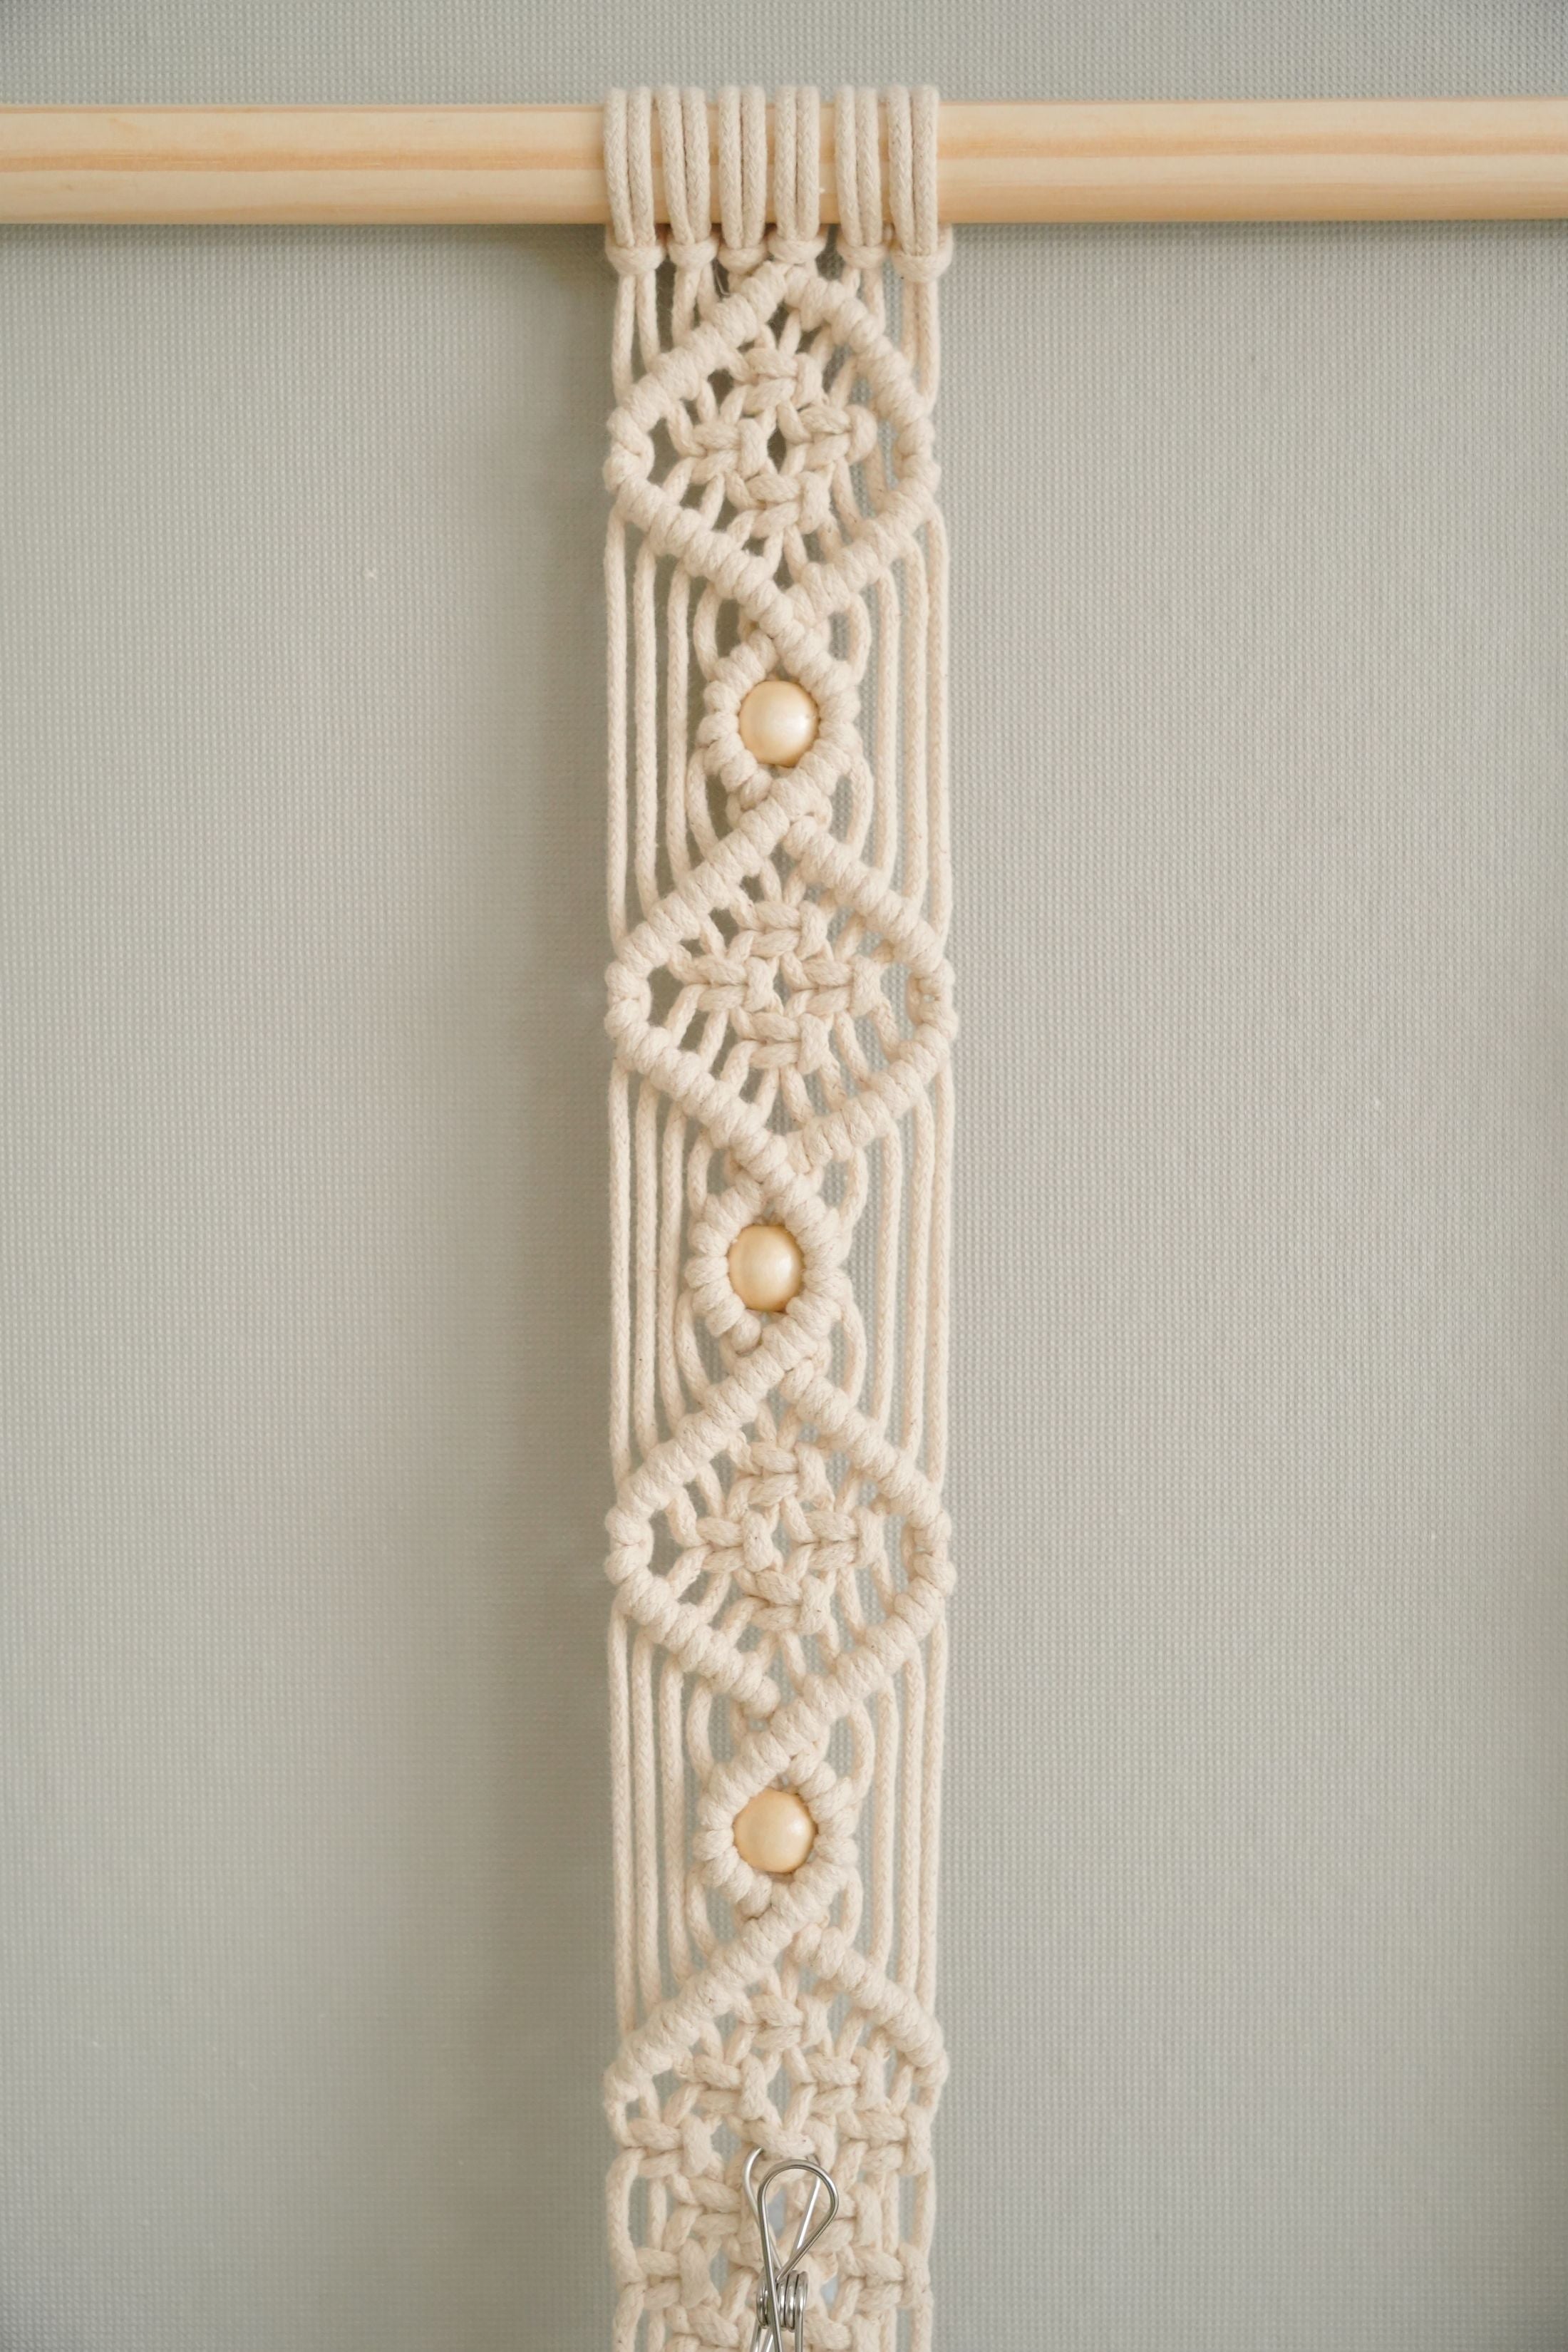 Macrame Cap Holder For Stylish Wall Cap Display And Storage